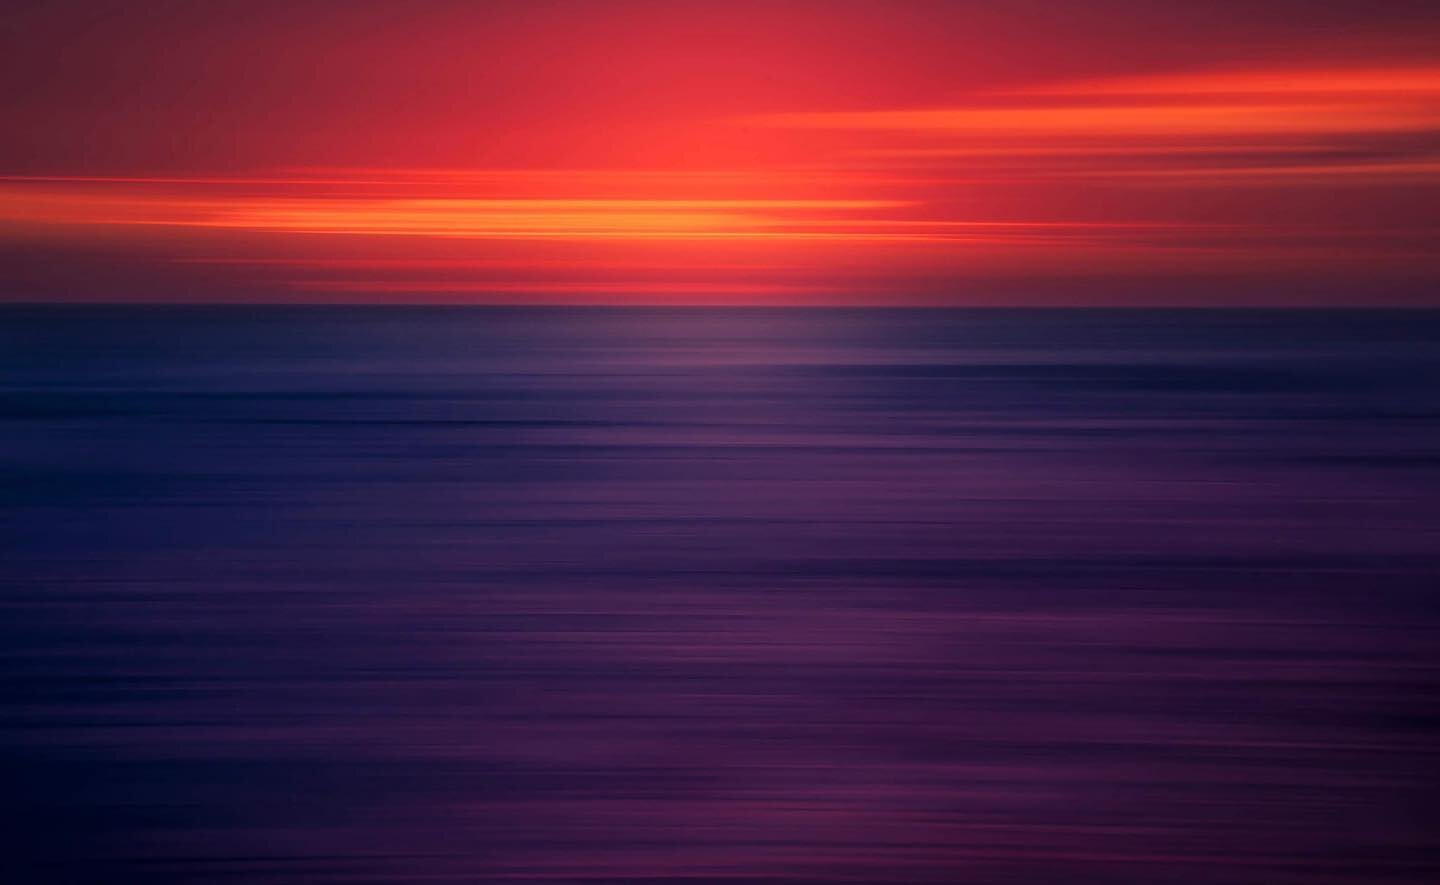 In contrast to the last post I wanted to hit you with some vibrant colour 🙂 icm from a brilliantly vibrant sunset